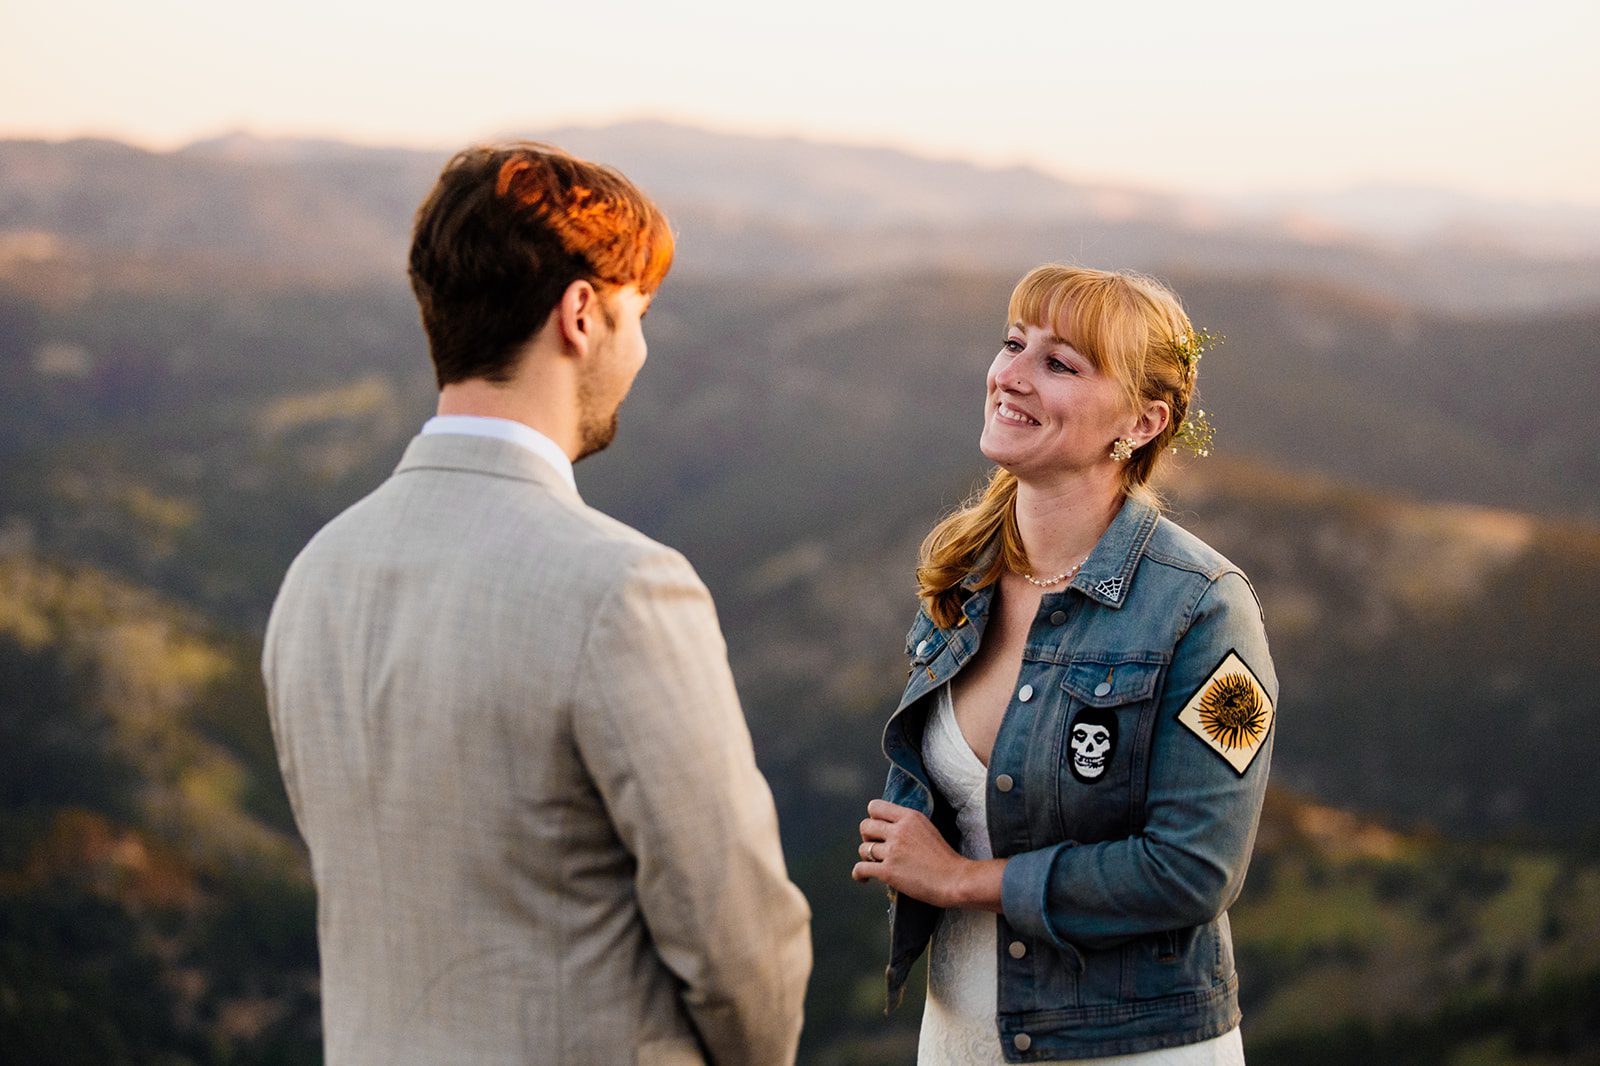 bride reaching for her vows from her jean jacket during sunrise elopement ceremony at Lost Gulch Overlook